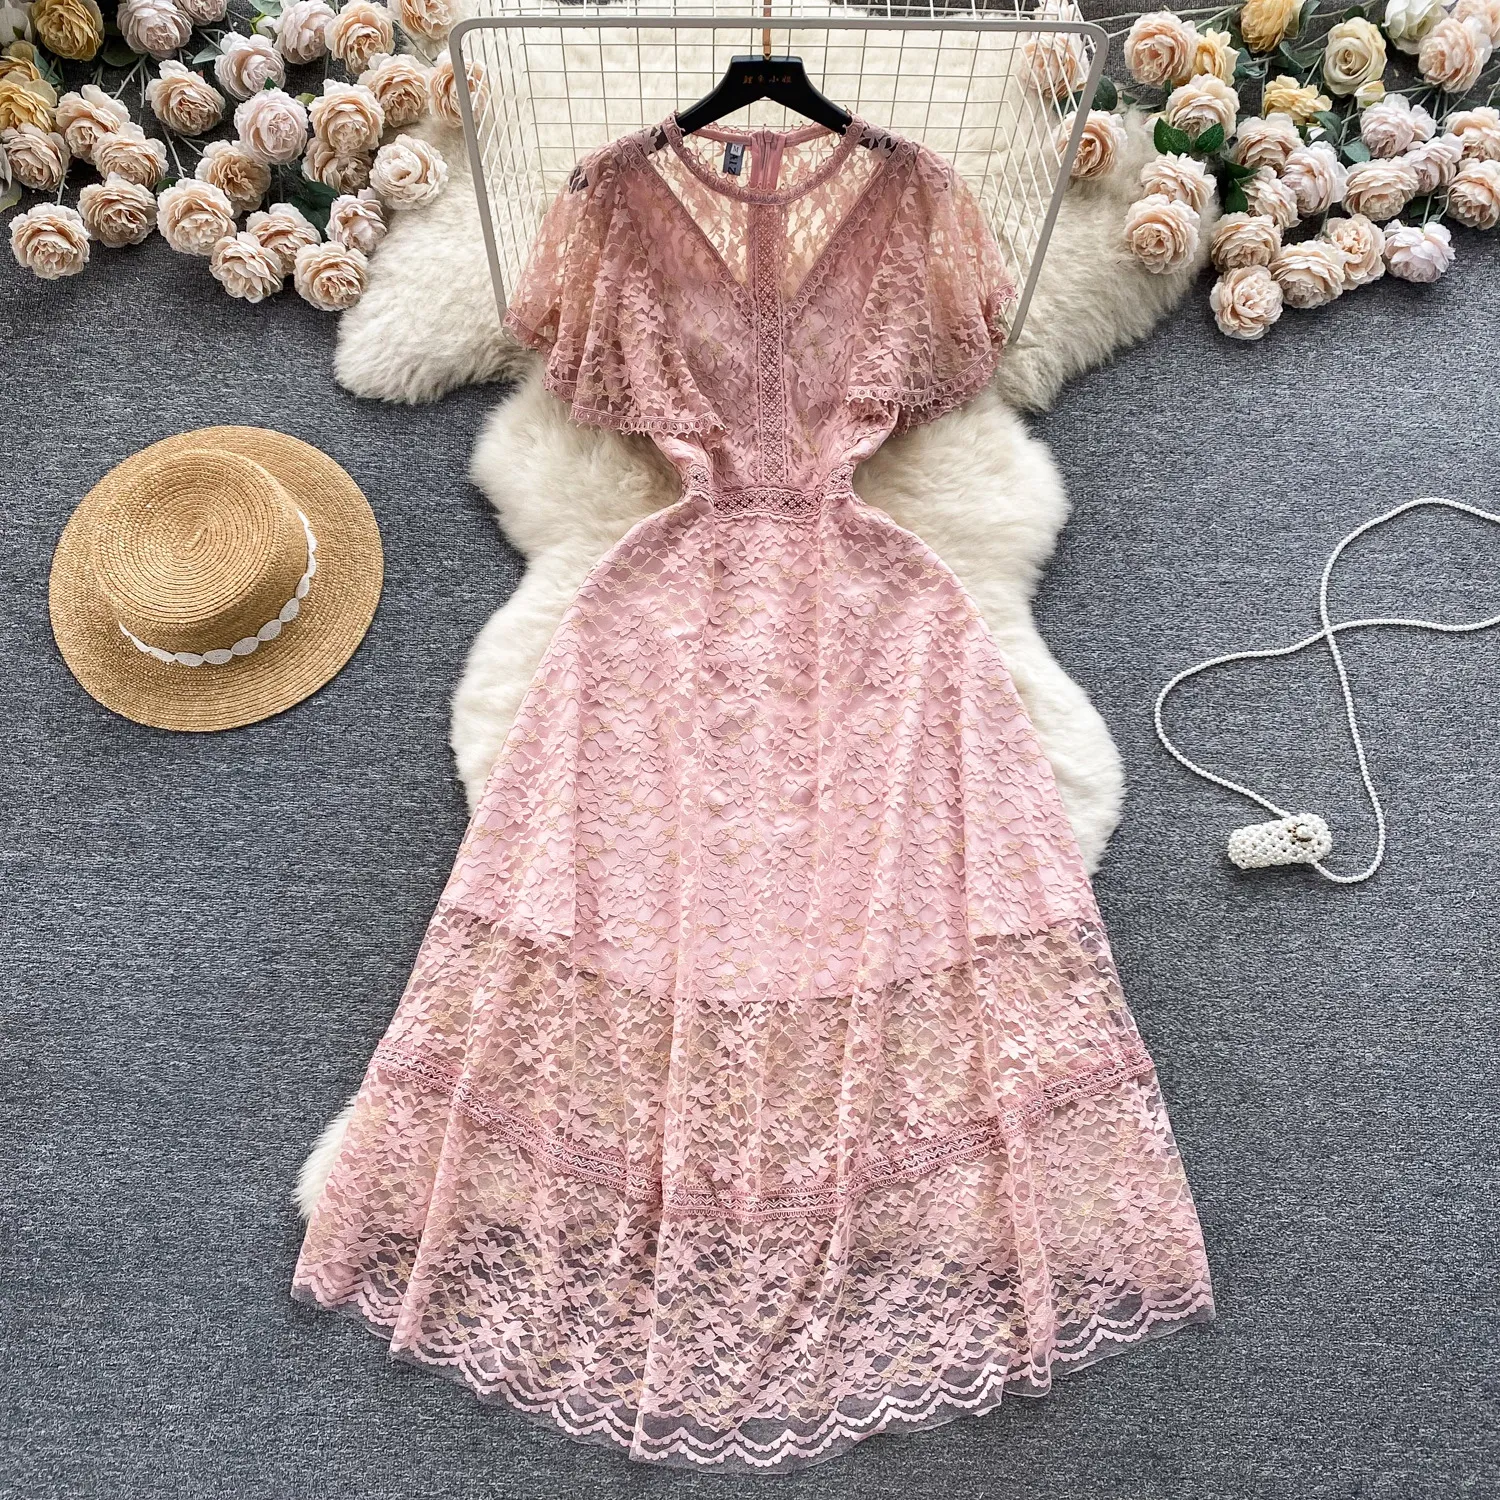 French retro gentle style dress for women with sweet ruffle edge sleeves, elegant and slim waist style lace lady dress